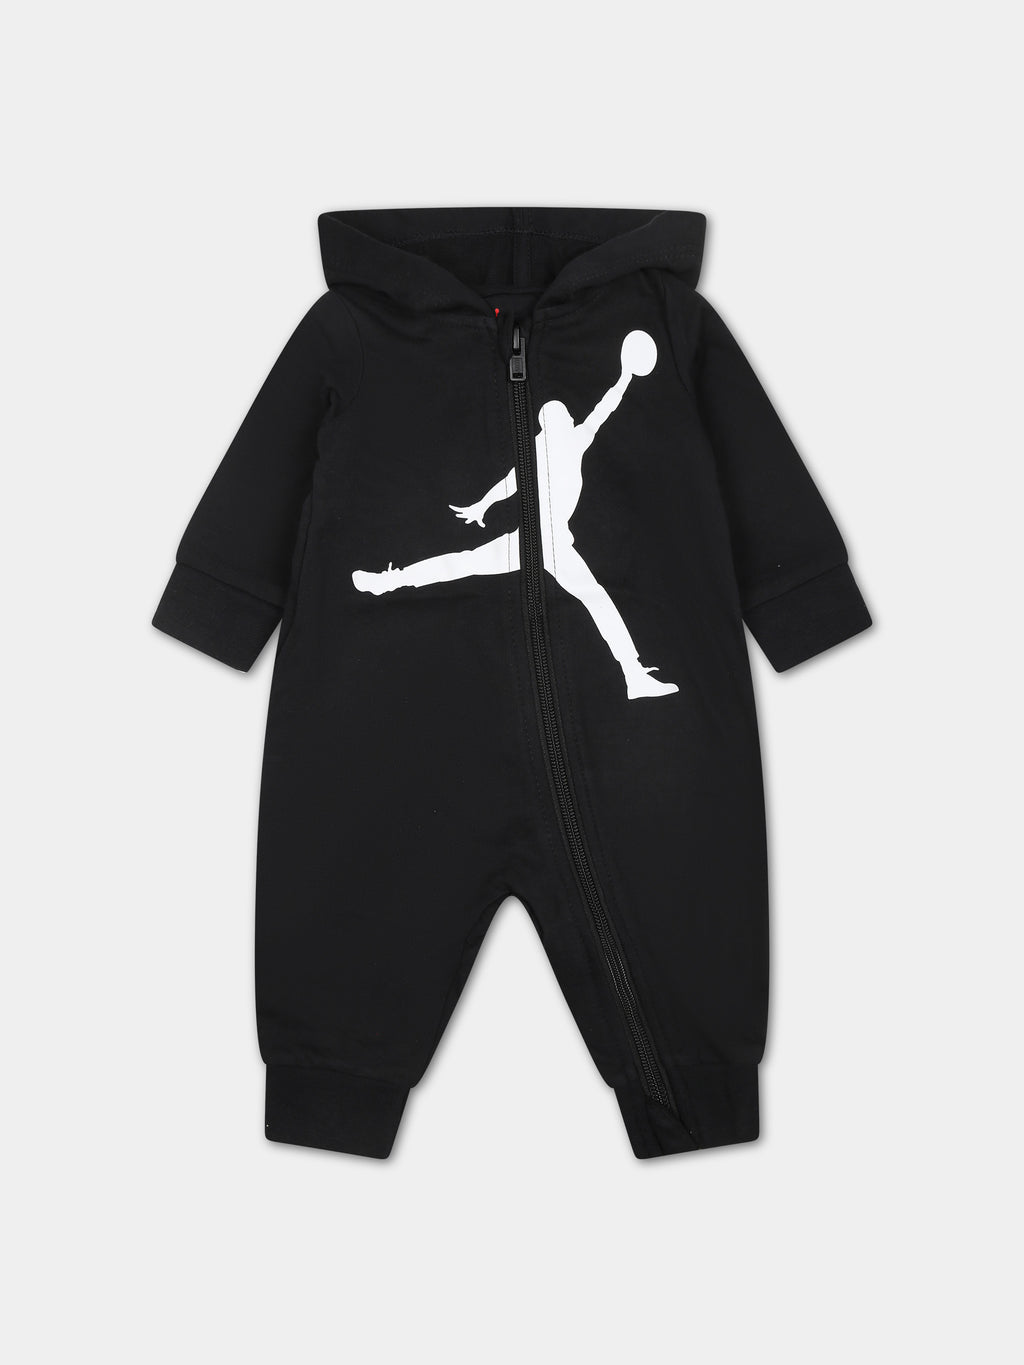 Black babygrow for baby boy with iconic Jumpman